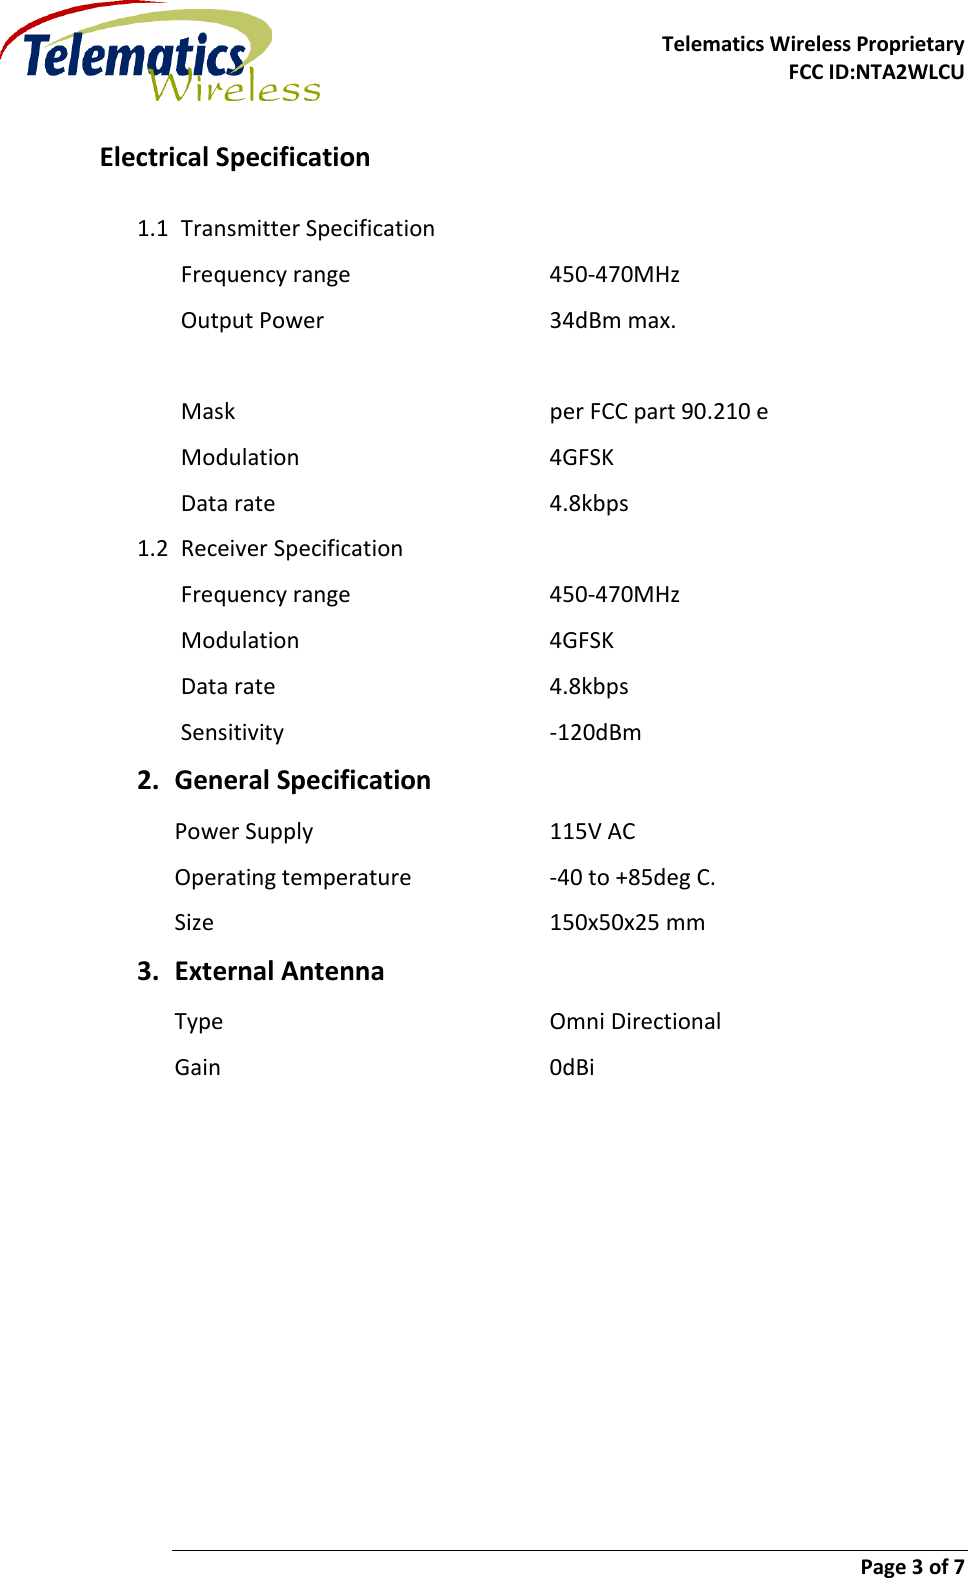     Telematics Wireless Proprietary   FCC ID:NTA2WLCU                        Page 3 of 7   Electrical Specification 1.1 Transmitter Specification Frequency range      450-470MHz Output Power       34dBm max.           Mask          per FCC part 90.210 e Modulation        4GFSK Data rate        4.8kbps 1.2 Receiver Specification Frequency range      450-470MHz Modulation        4GFSK Data rate        4.8kbps Sensitivity        -120dBm 2. General Specification Power Supply        115V AC Operating temperature    -40 to +85deg C. Size          150x50x25 mm 3. External Antenna Type          Omni Directional Gain          0dBi    